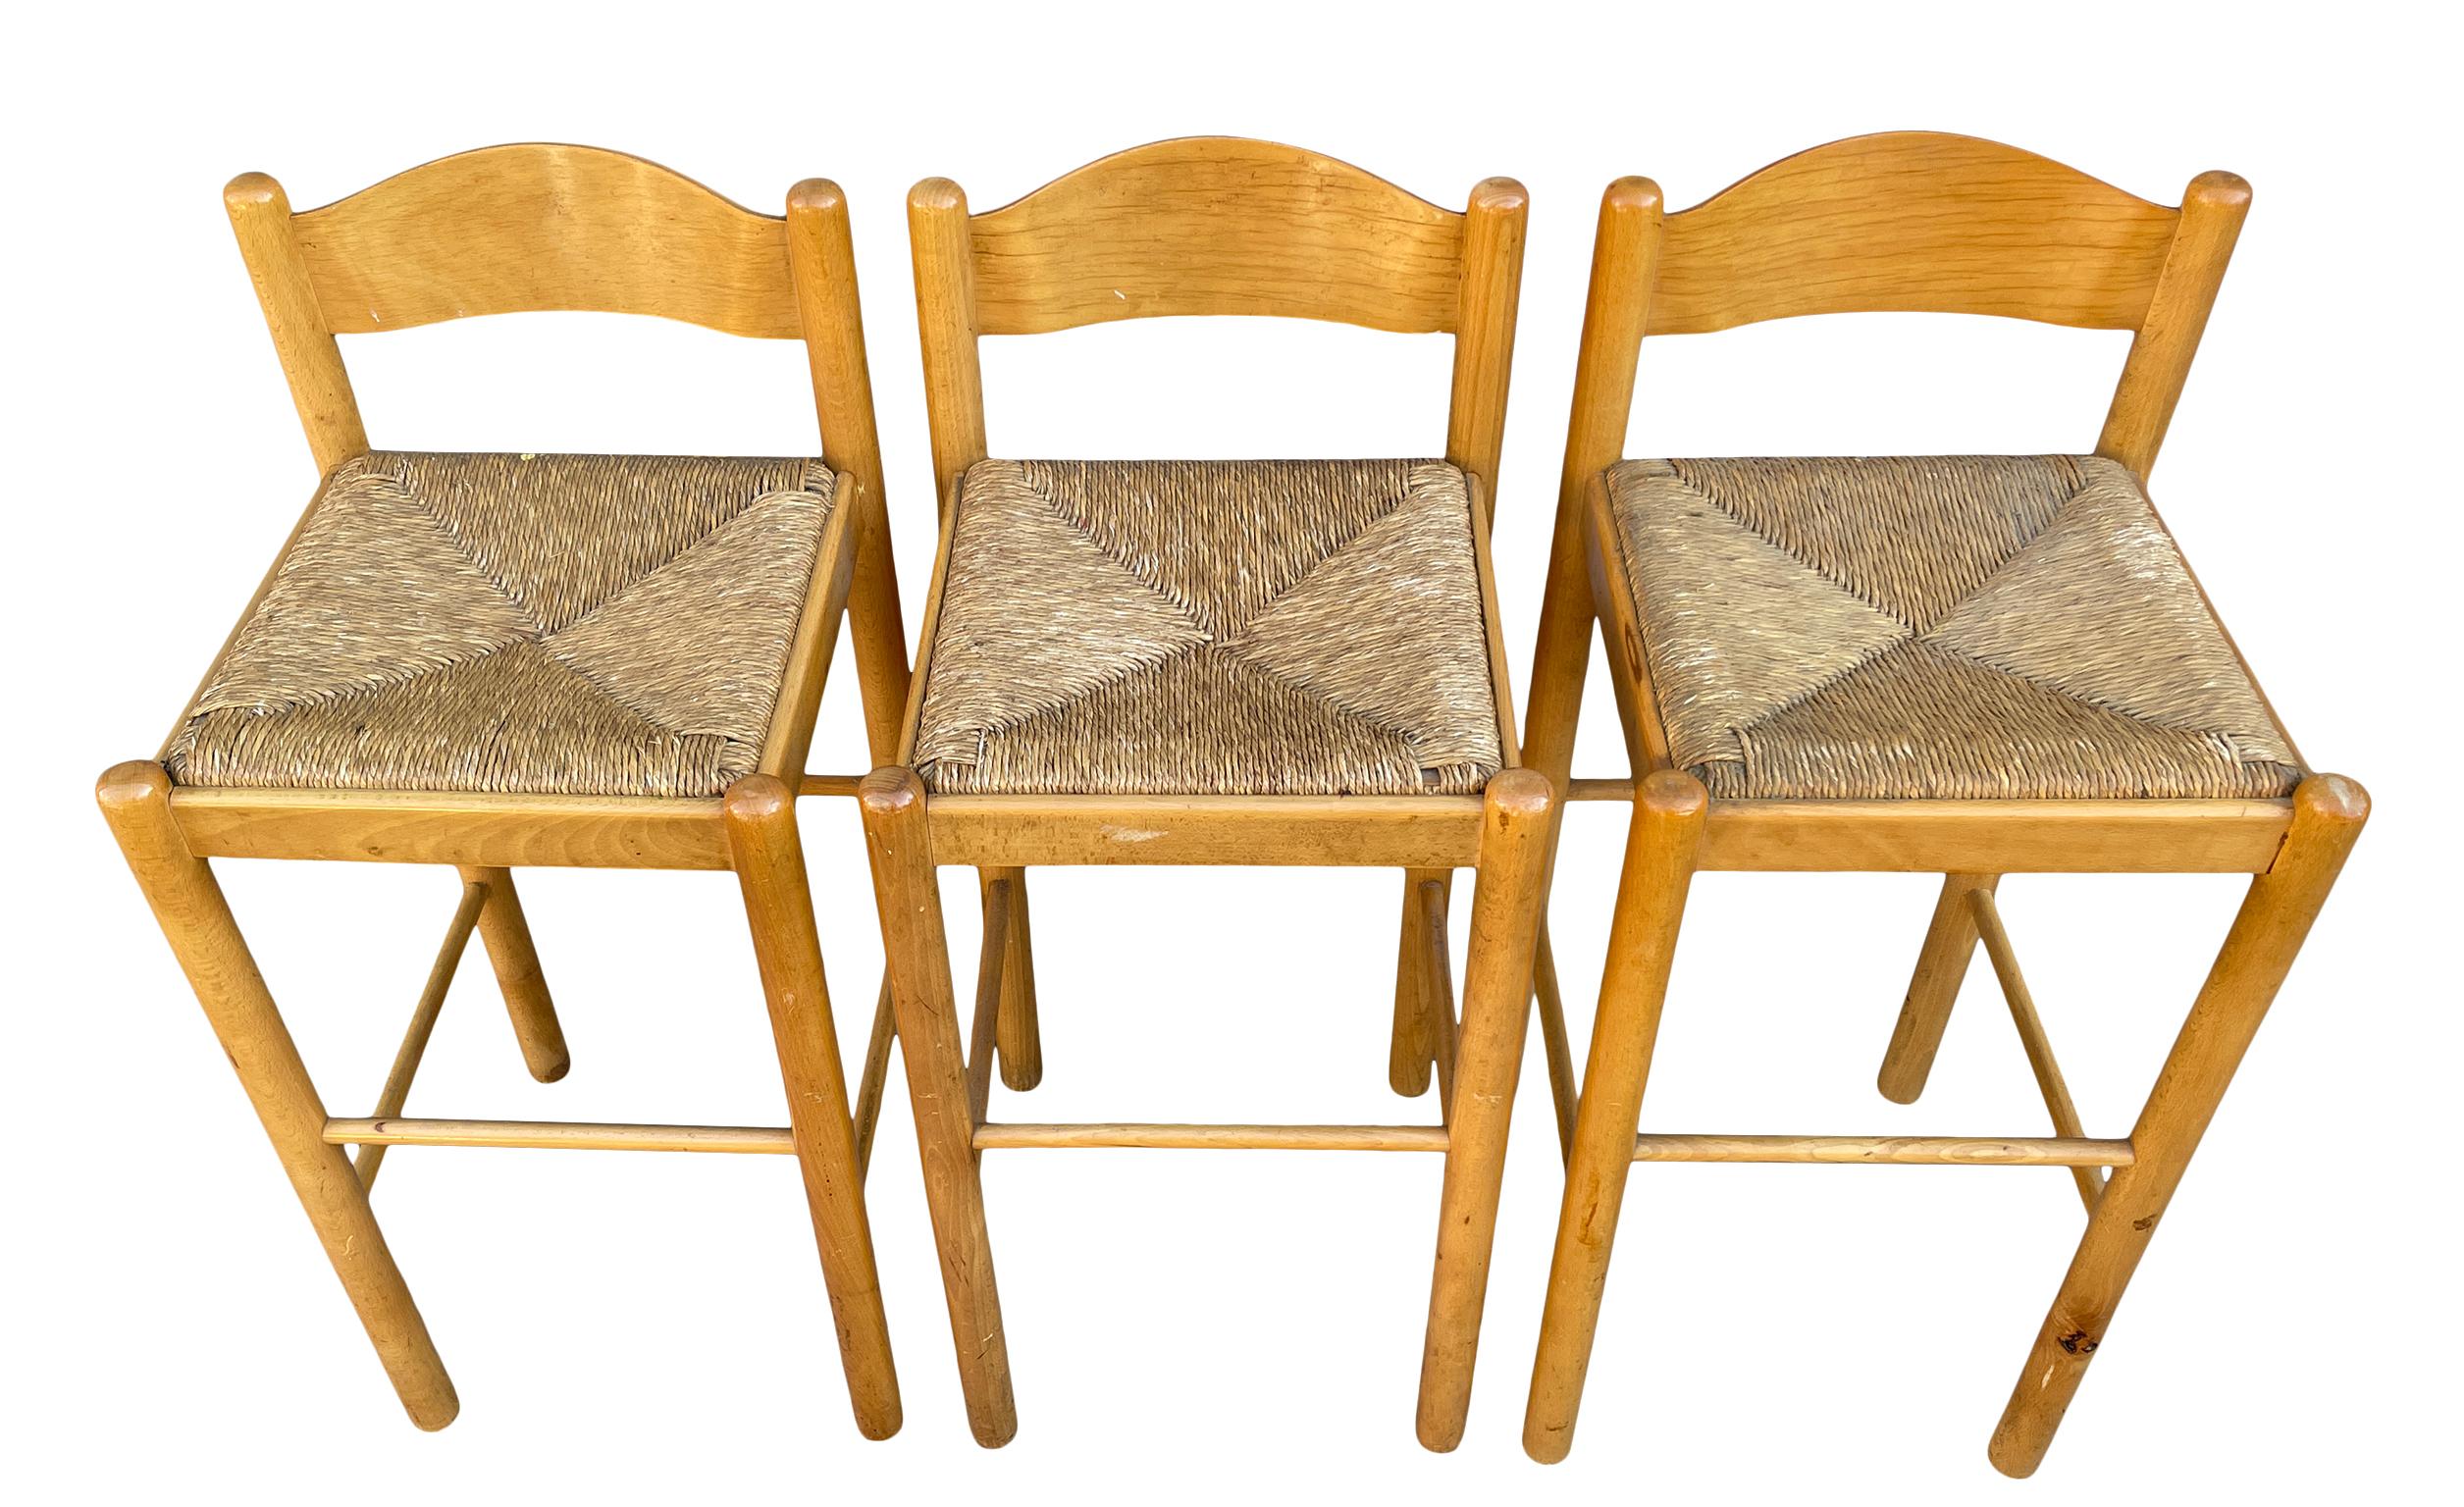 Set of 3 Mid-Century Modern bar stools circular maple framed and rush woven seats with bent plywood back rests. 30” seat height. Solid sturdy stools in good vintage condition. This listing is for the set of 3 stools.